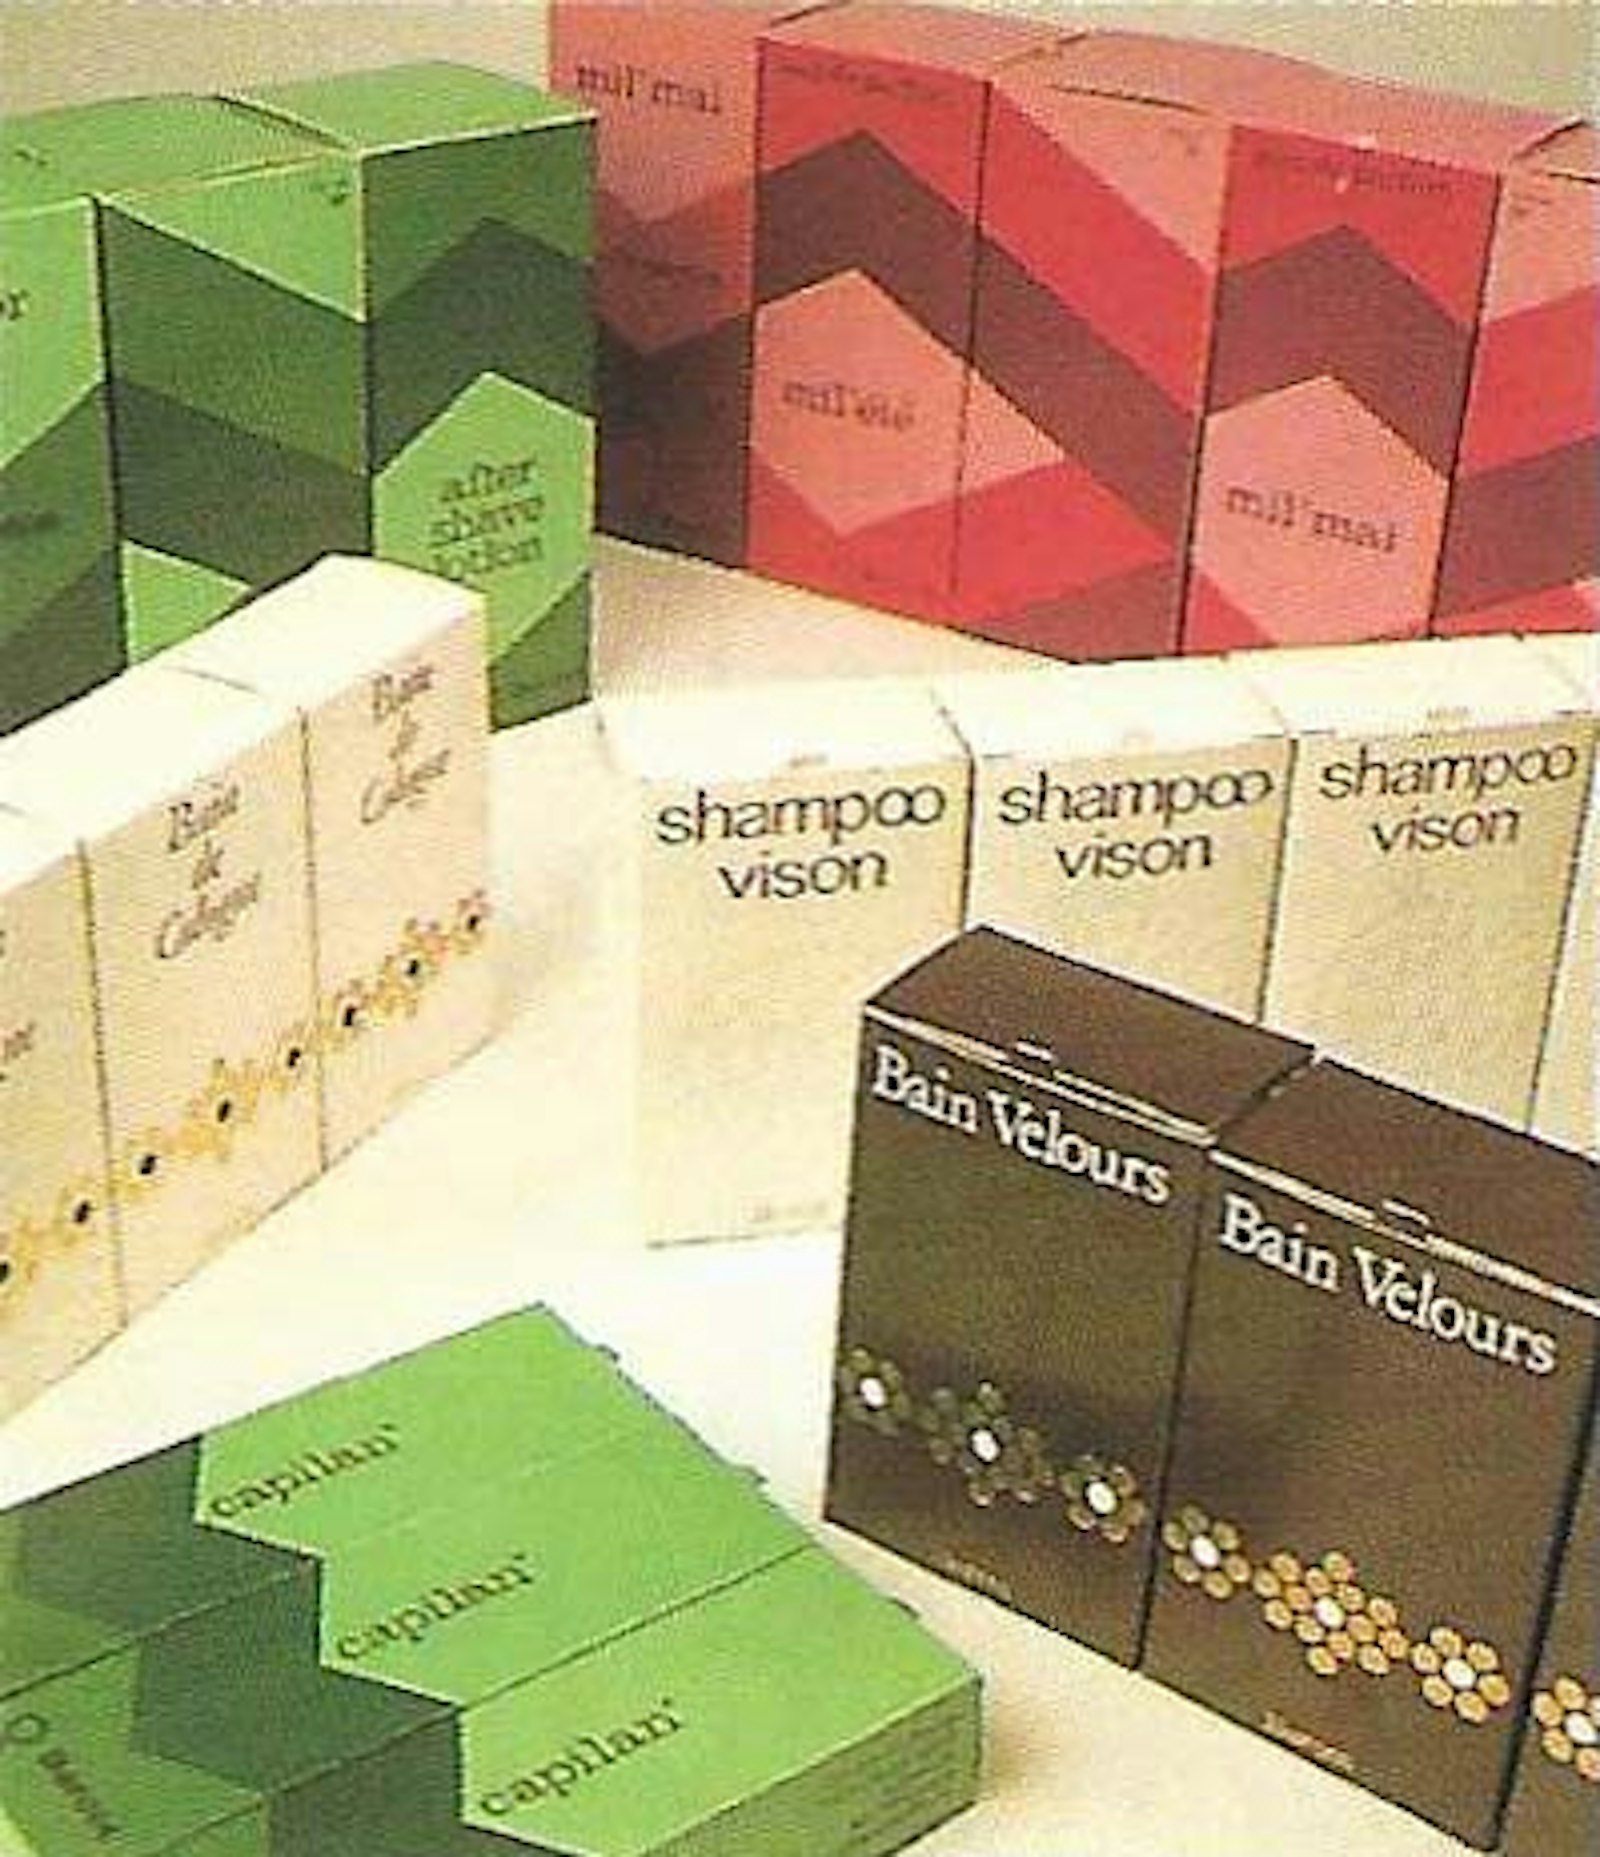 Packaging for cosmetics, 1960-1970